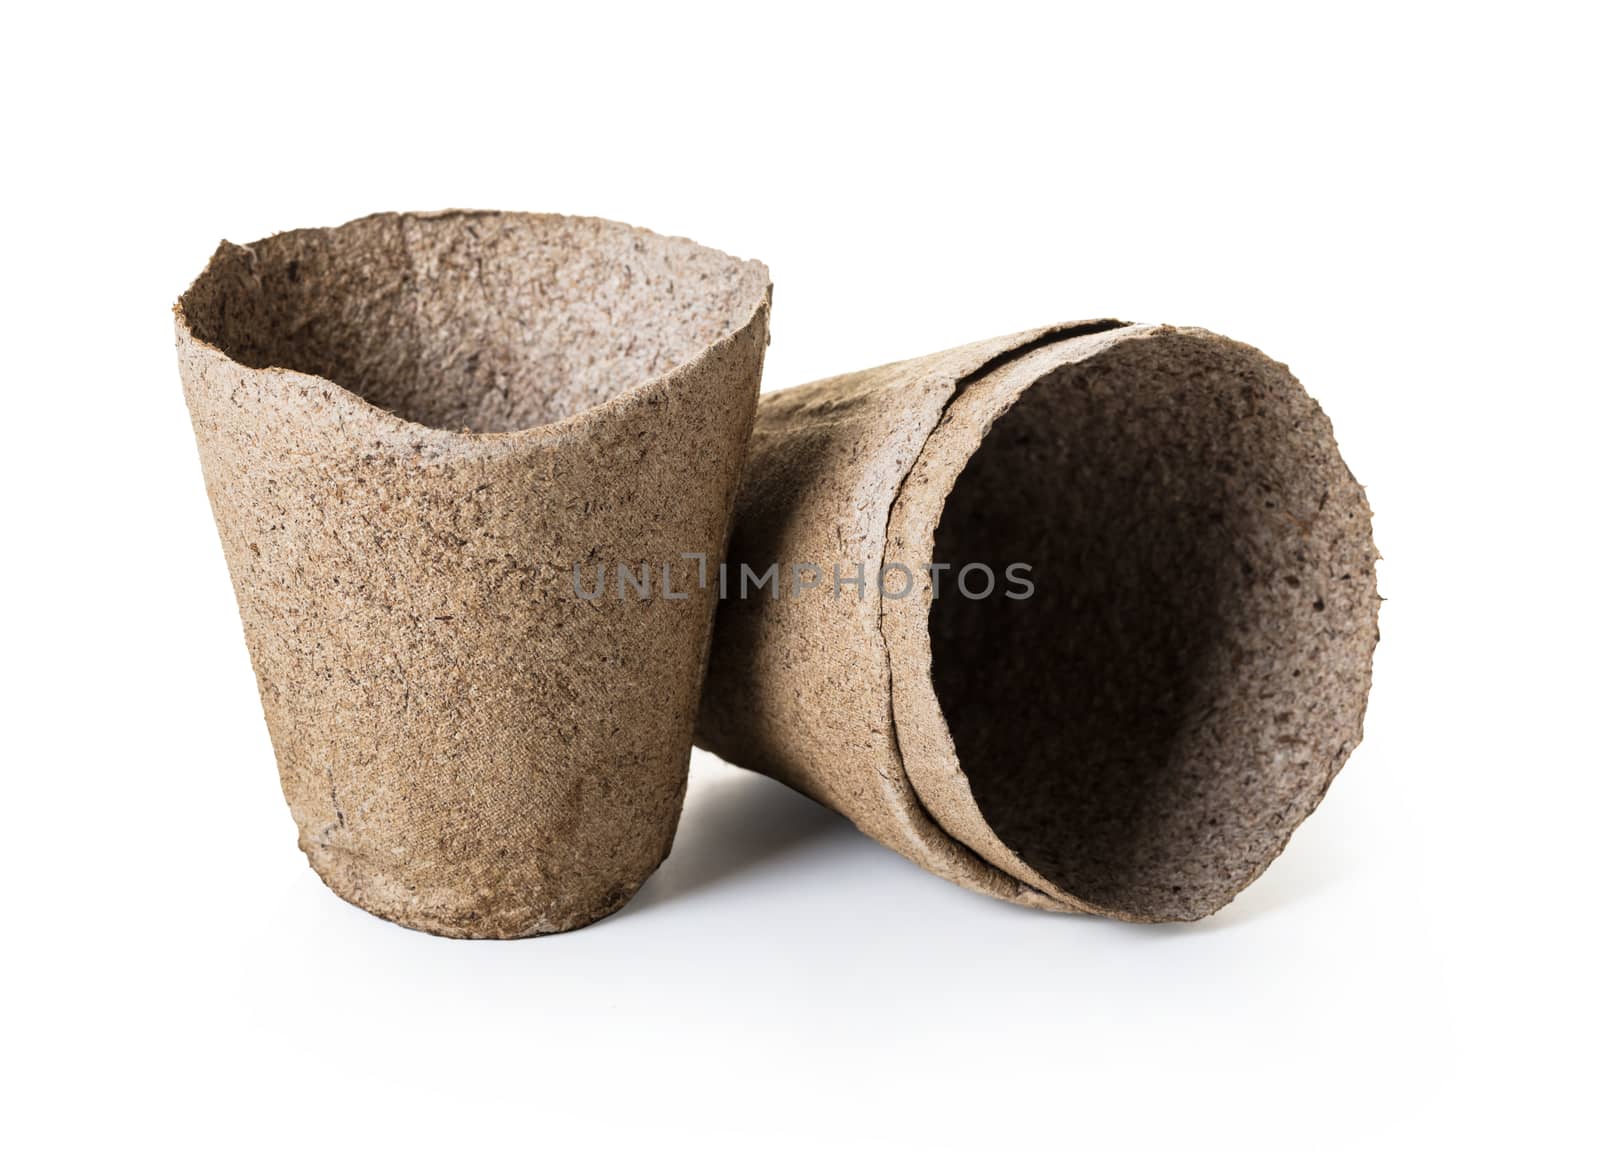 new flower pots on white isolated background